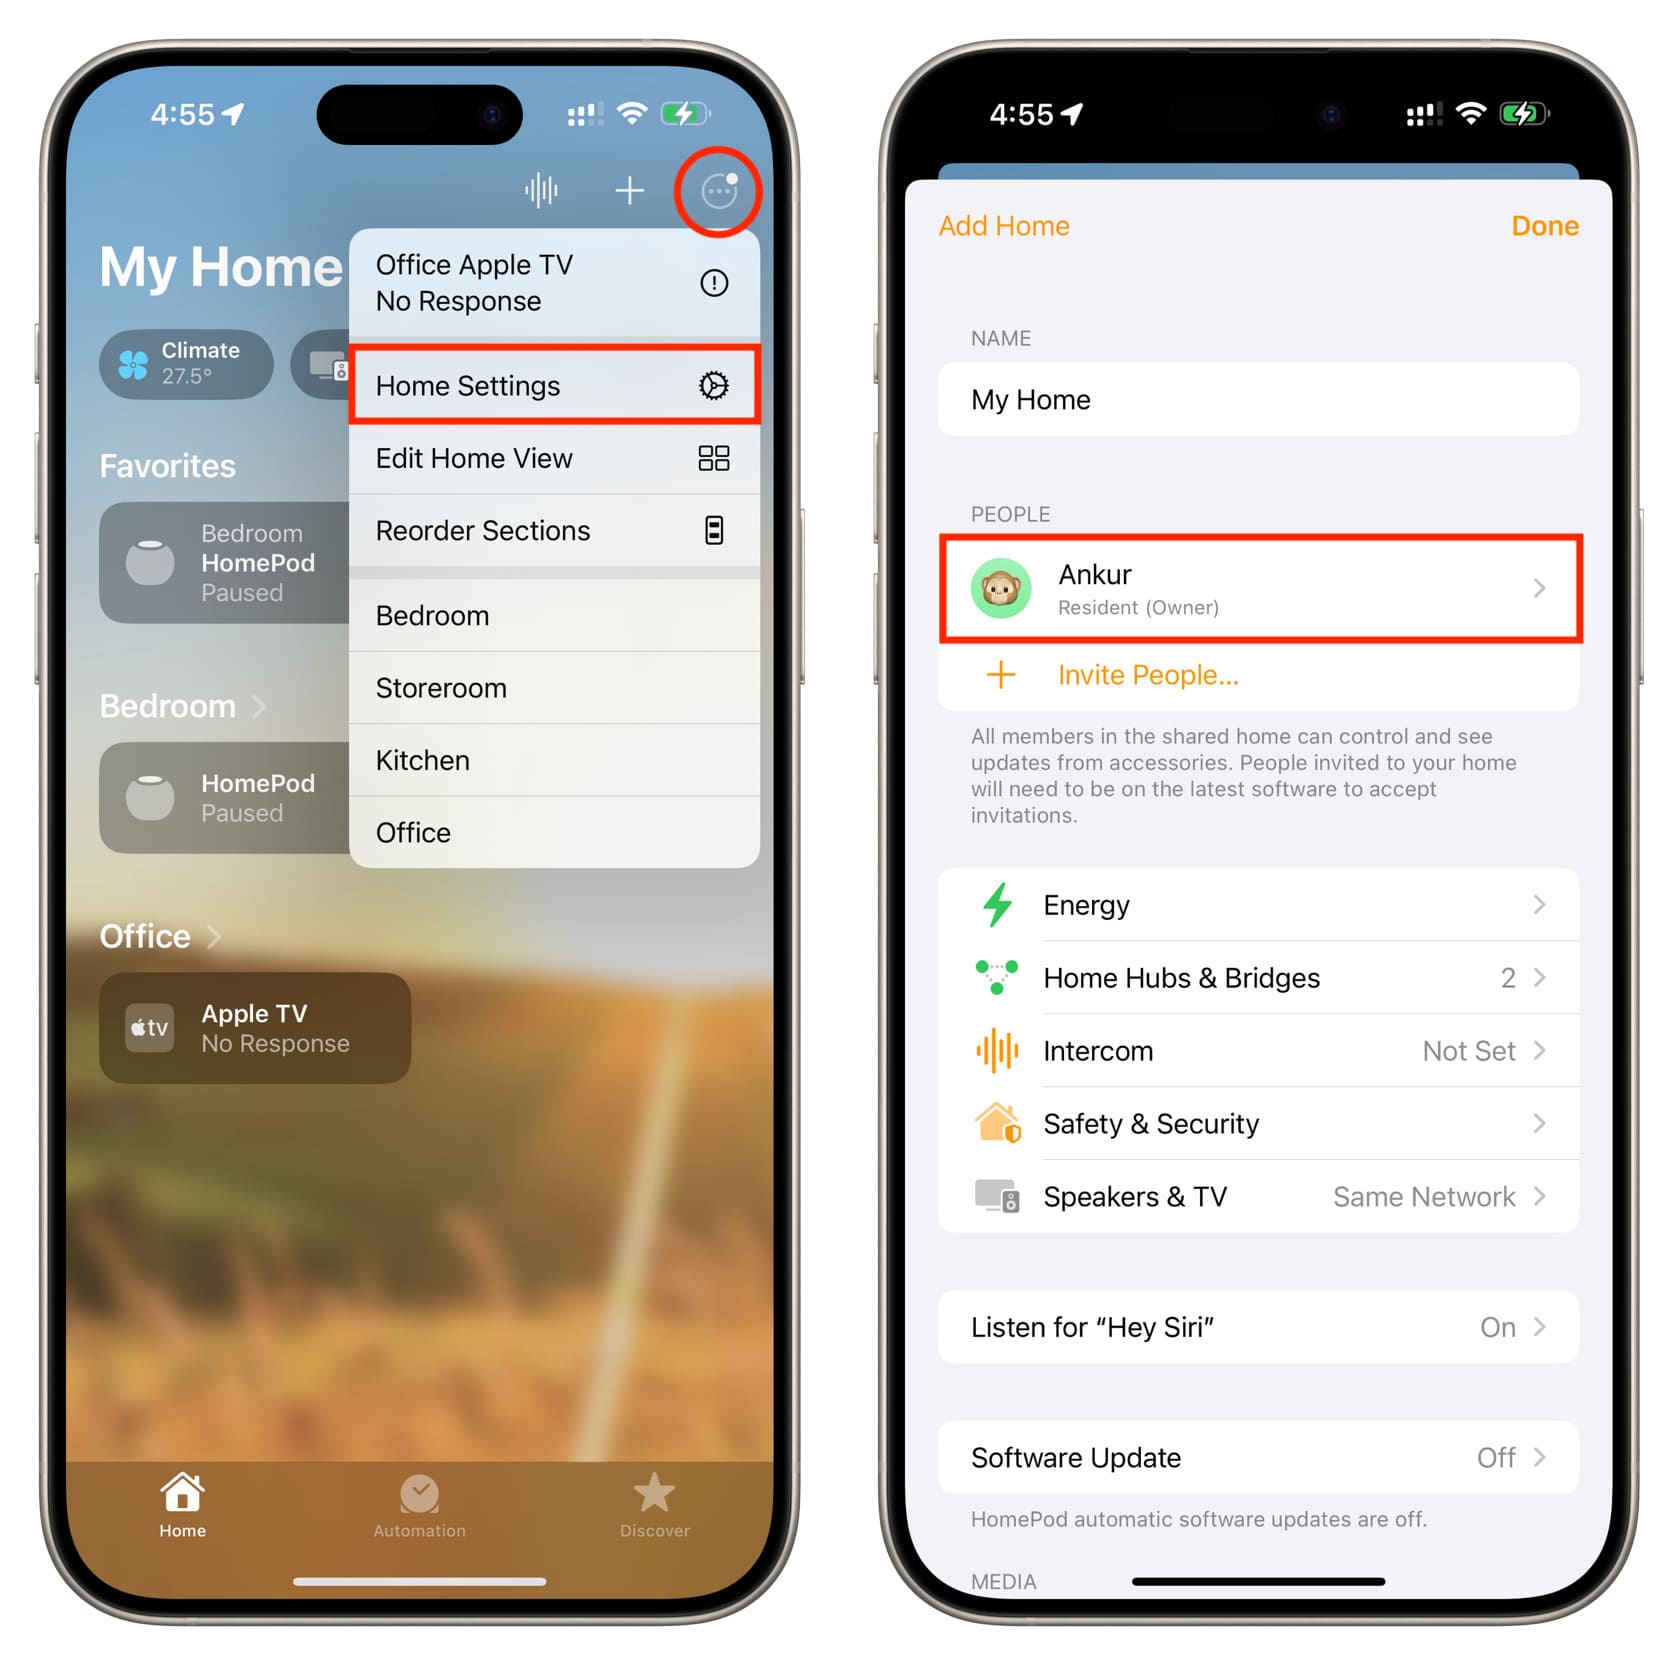 Tap Home Settings in iPhone Home app and choose user